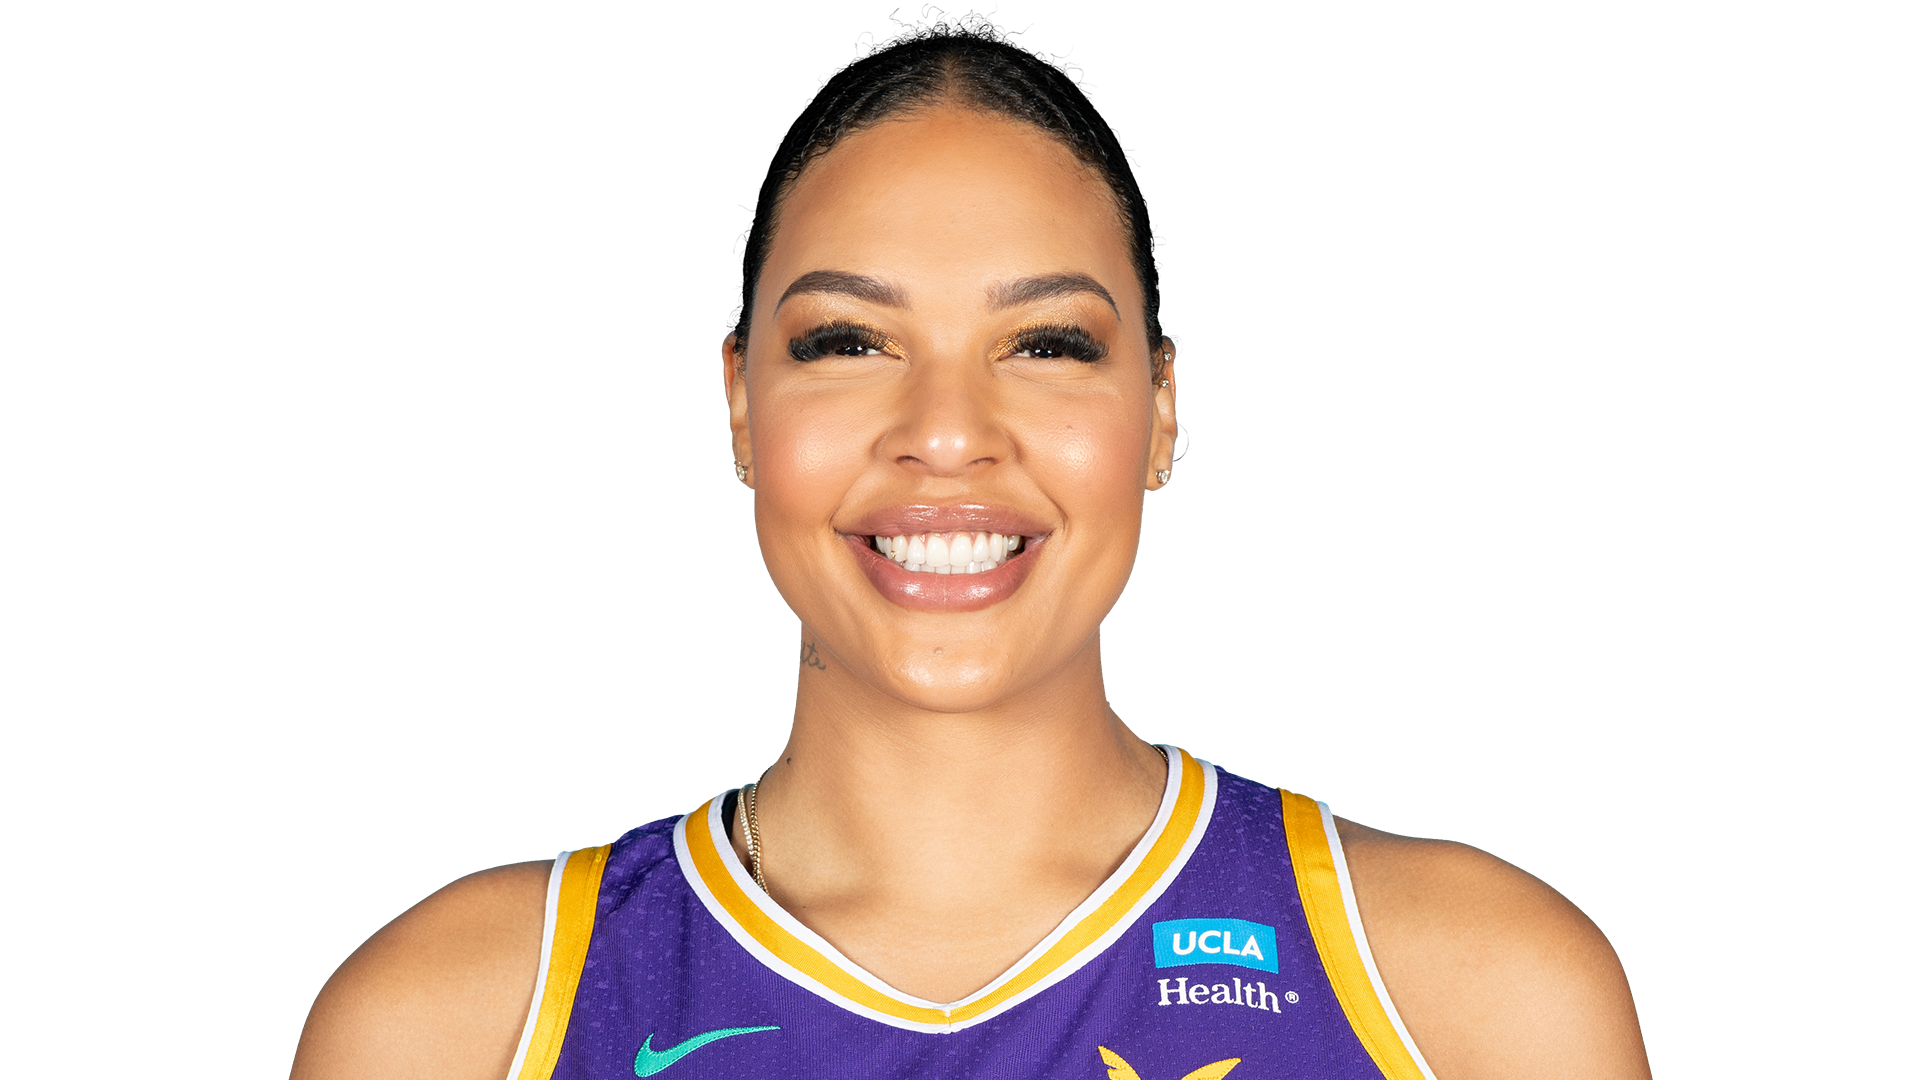 Liz Cambage and Los Angeles Sparks agree to part ways in contract divorce